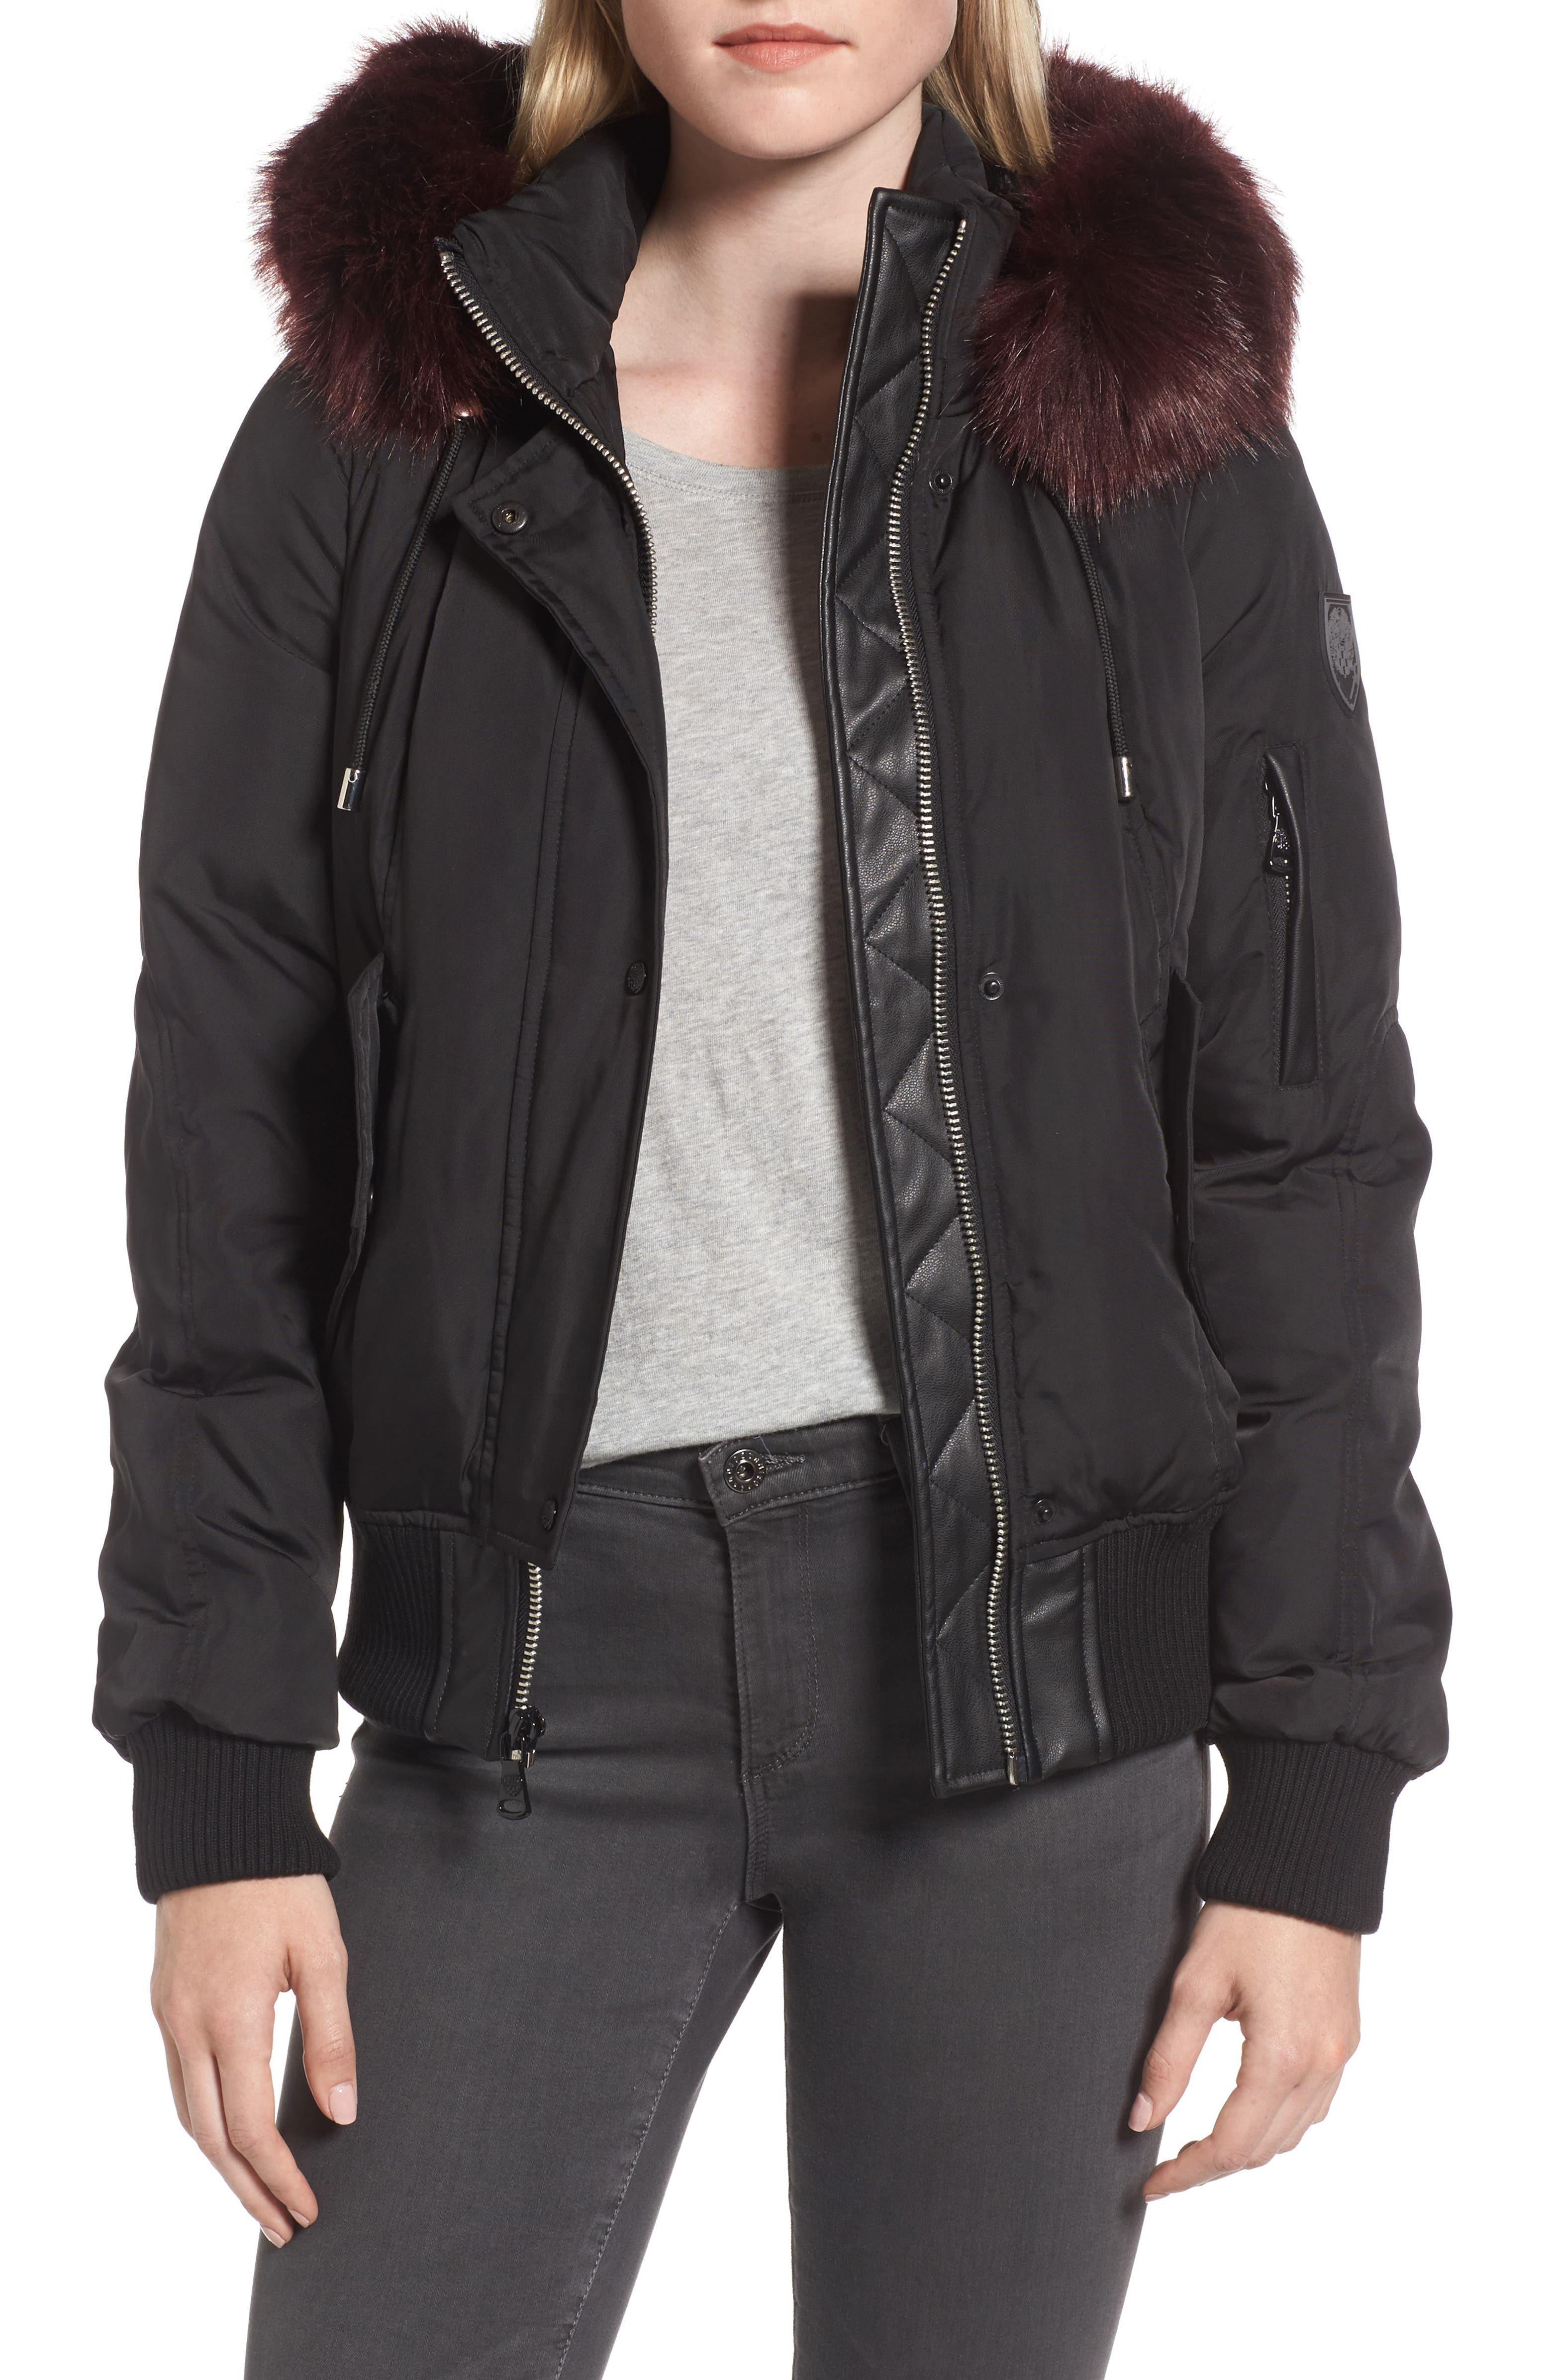 Vince Camuto Quilted Bomber Jacket with Faux Fur Trim | Nordstrom